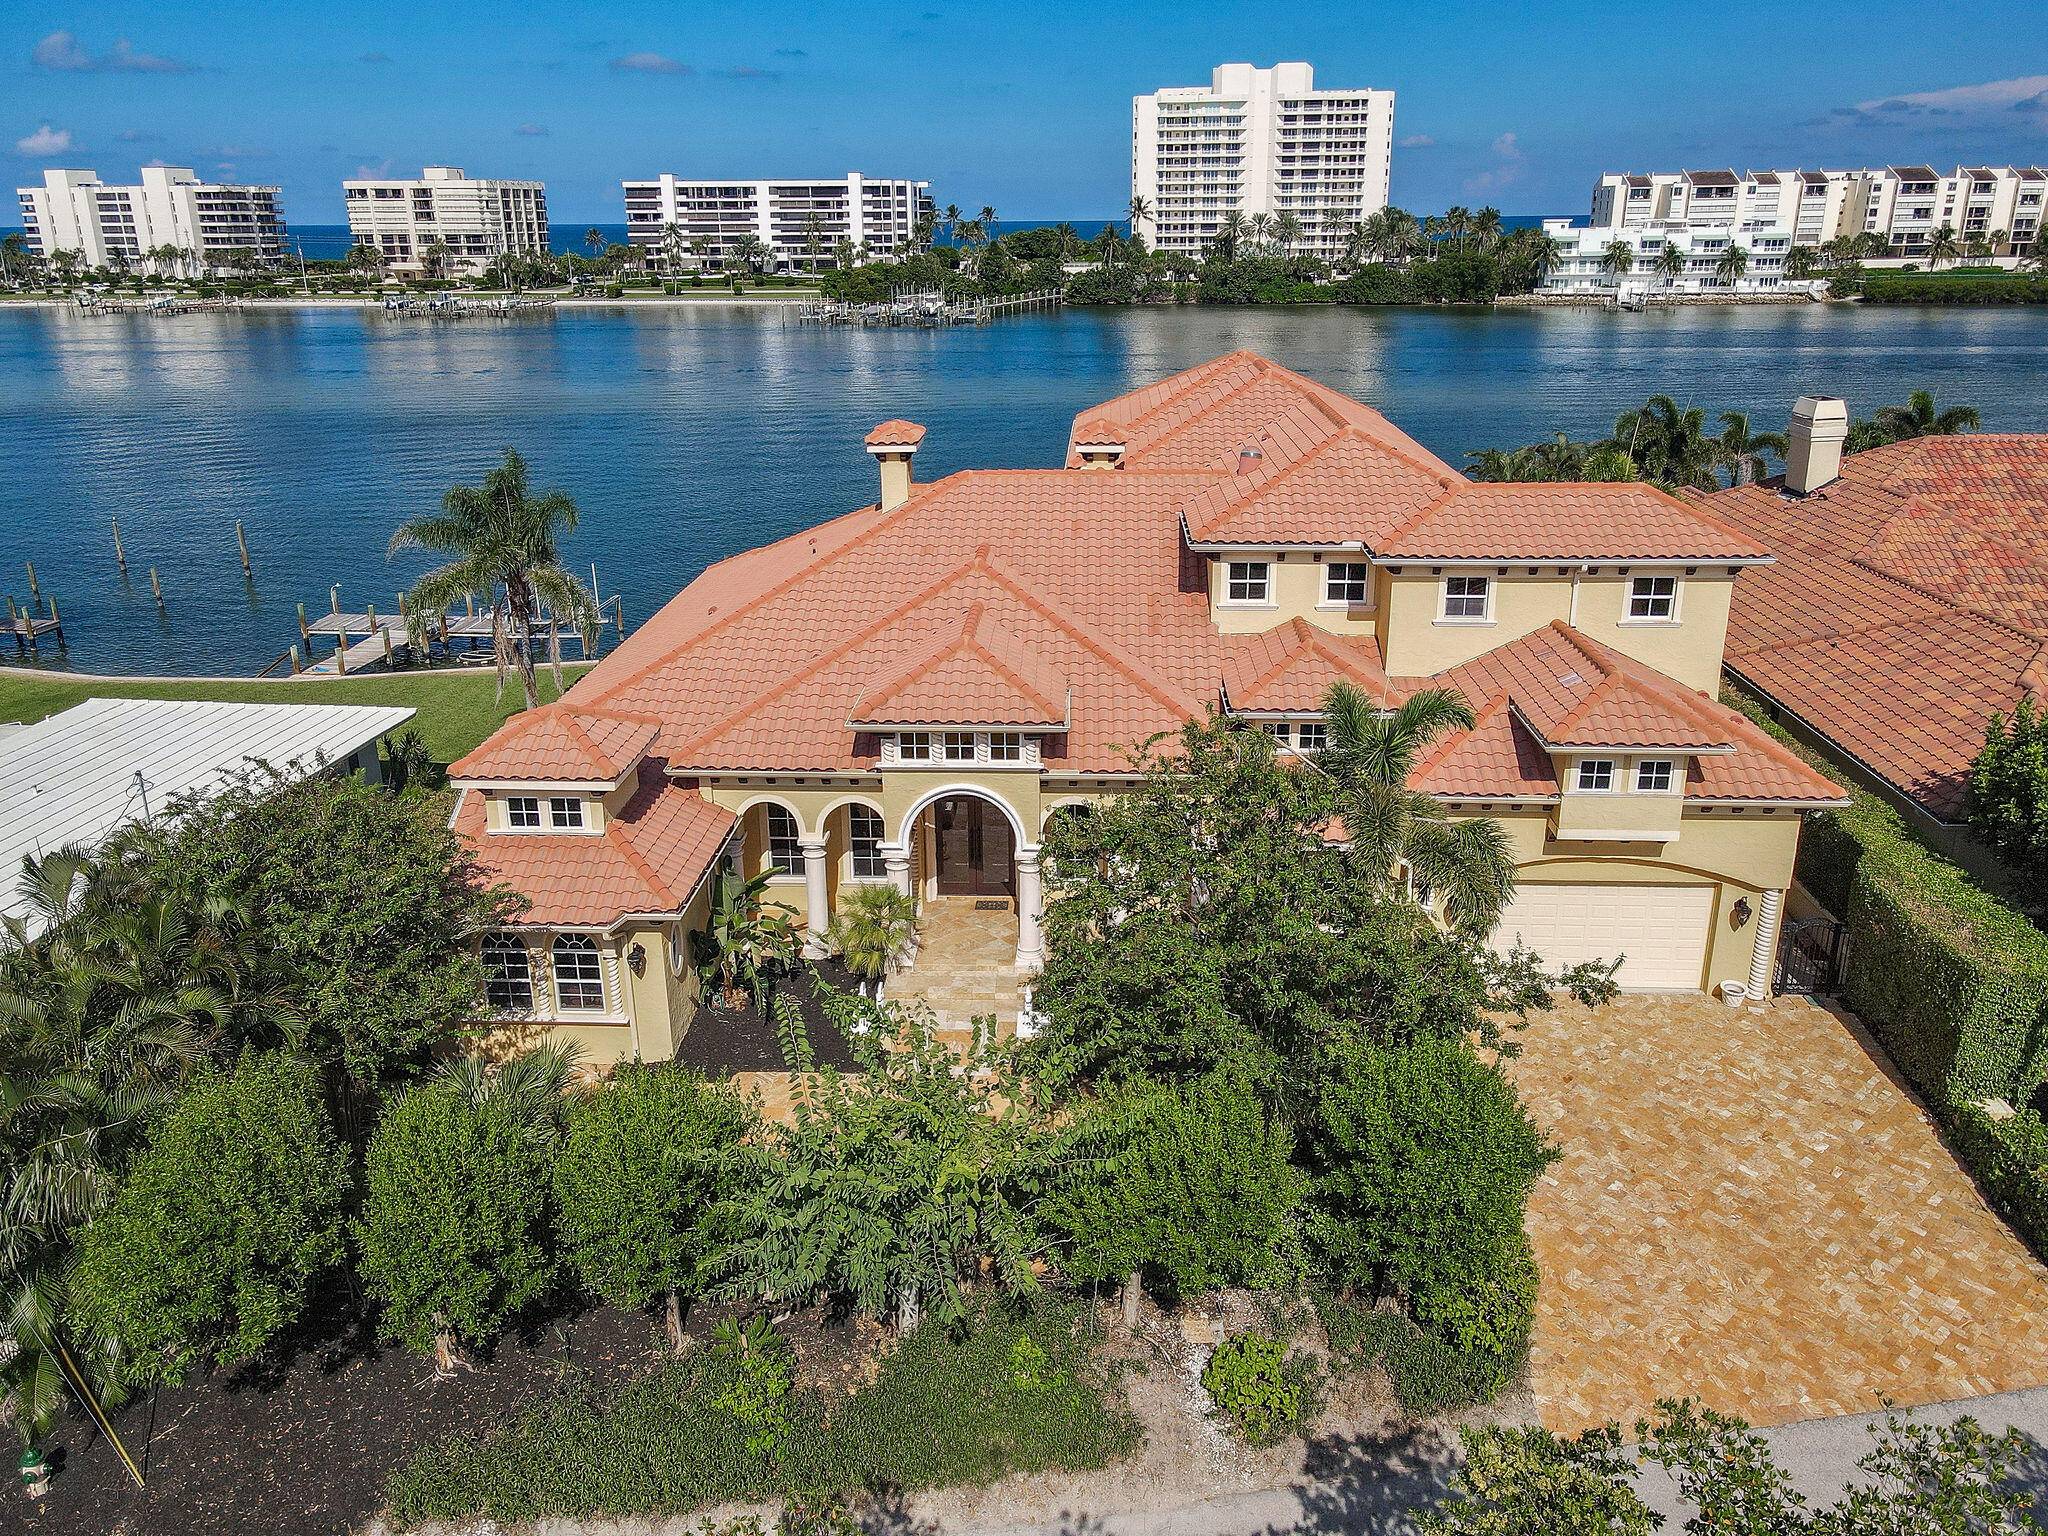 Stunning estate residence situated along the coveted Intracoastal Waterway with its mesmerizing Bahama blue waters in sought after Jupiter.